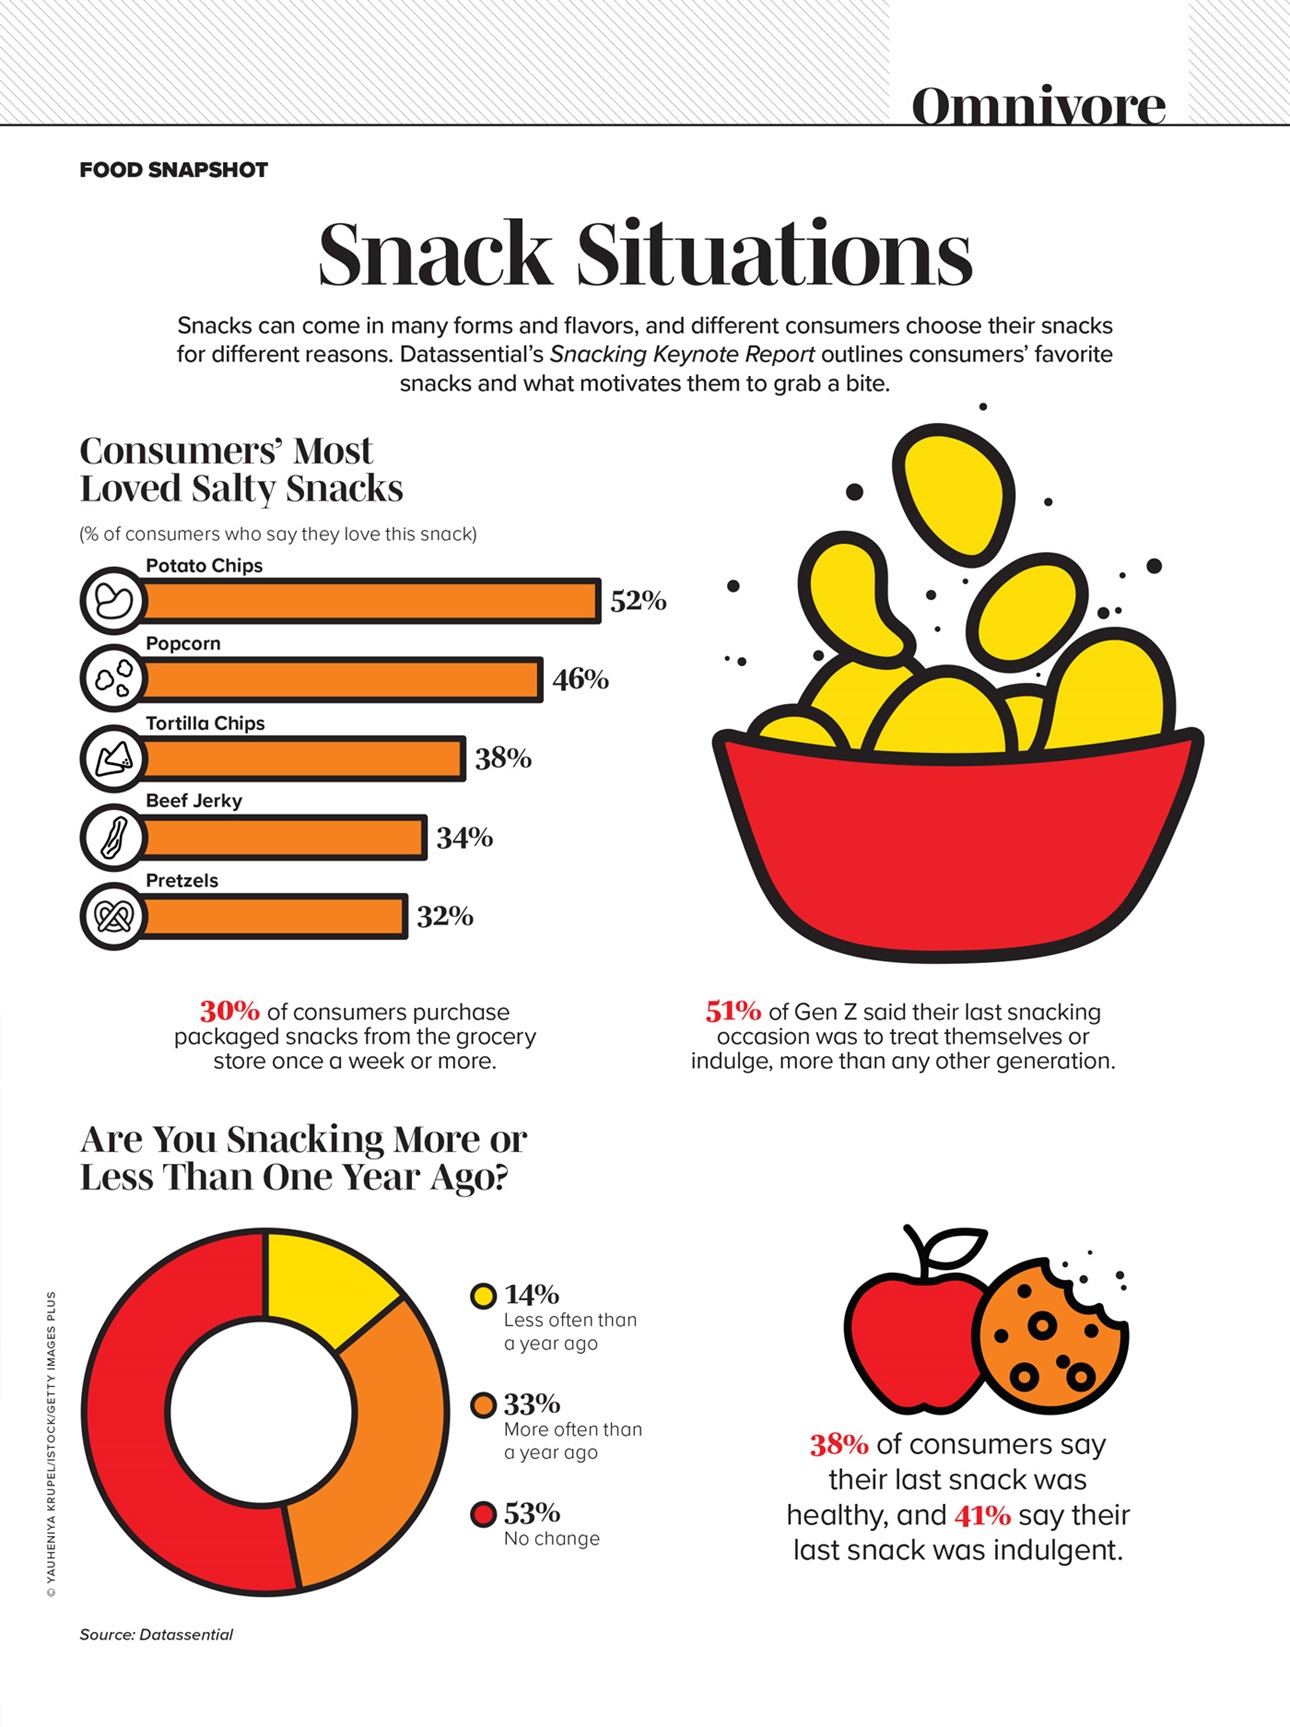 An infographic describing consumers’ snacking preferences and generational statistics.